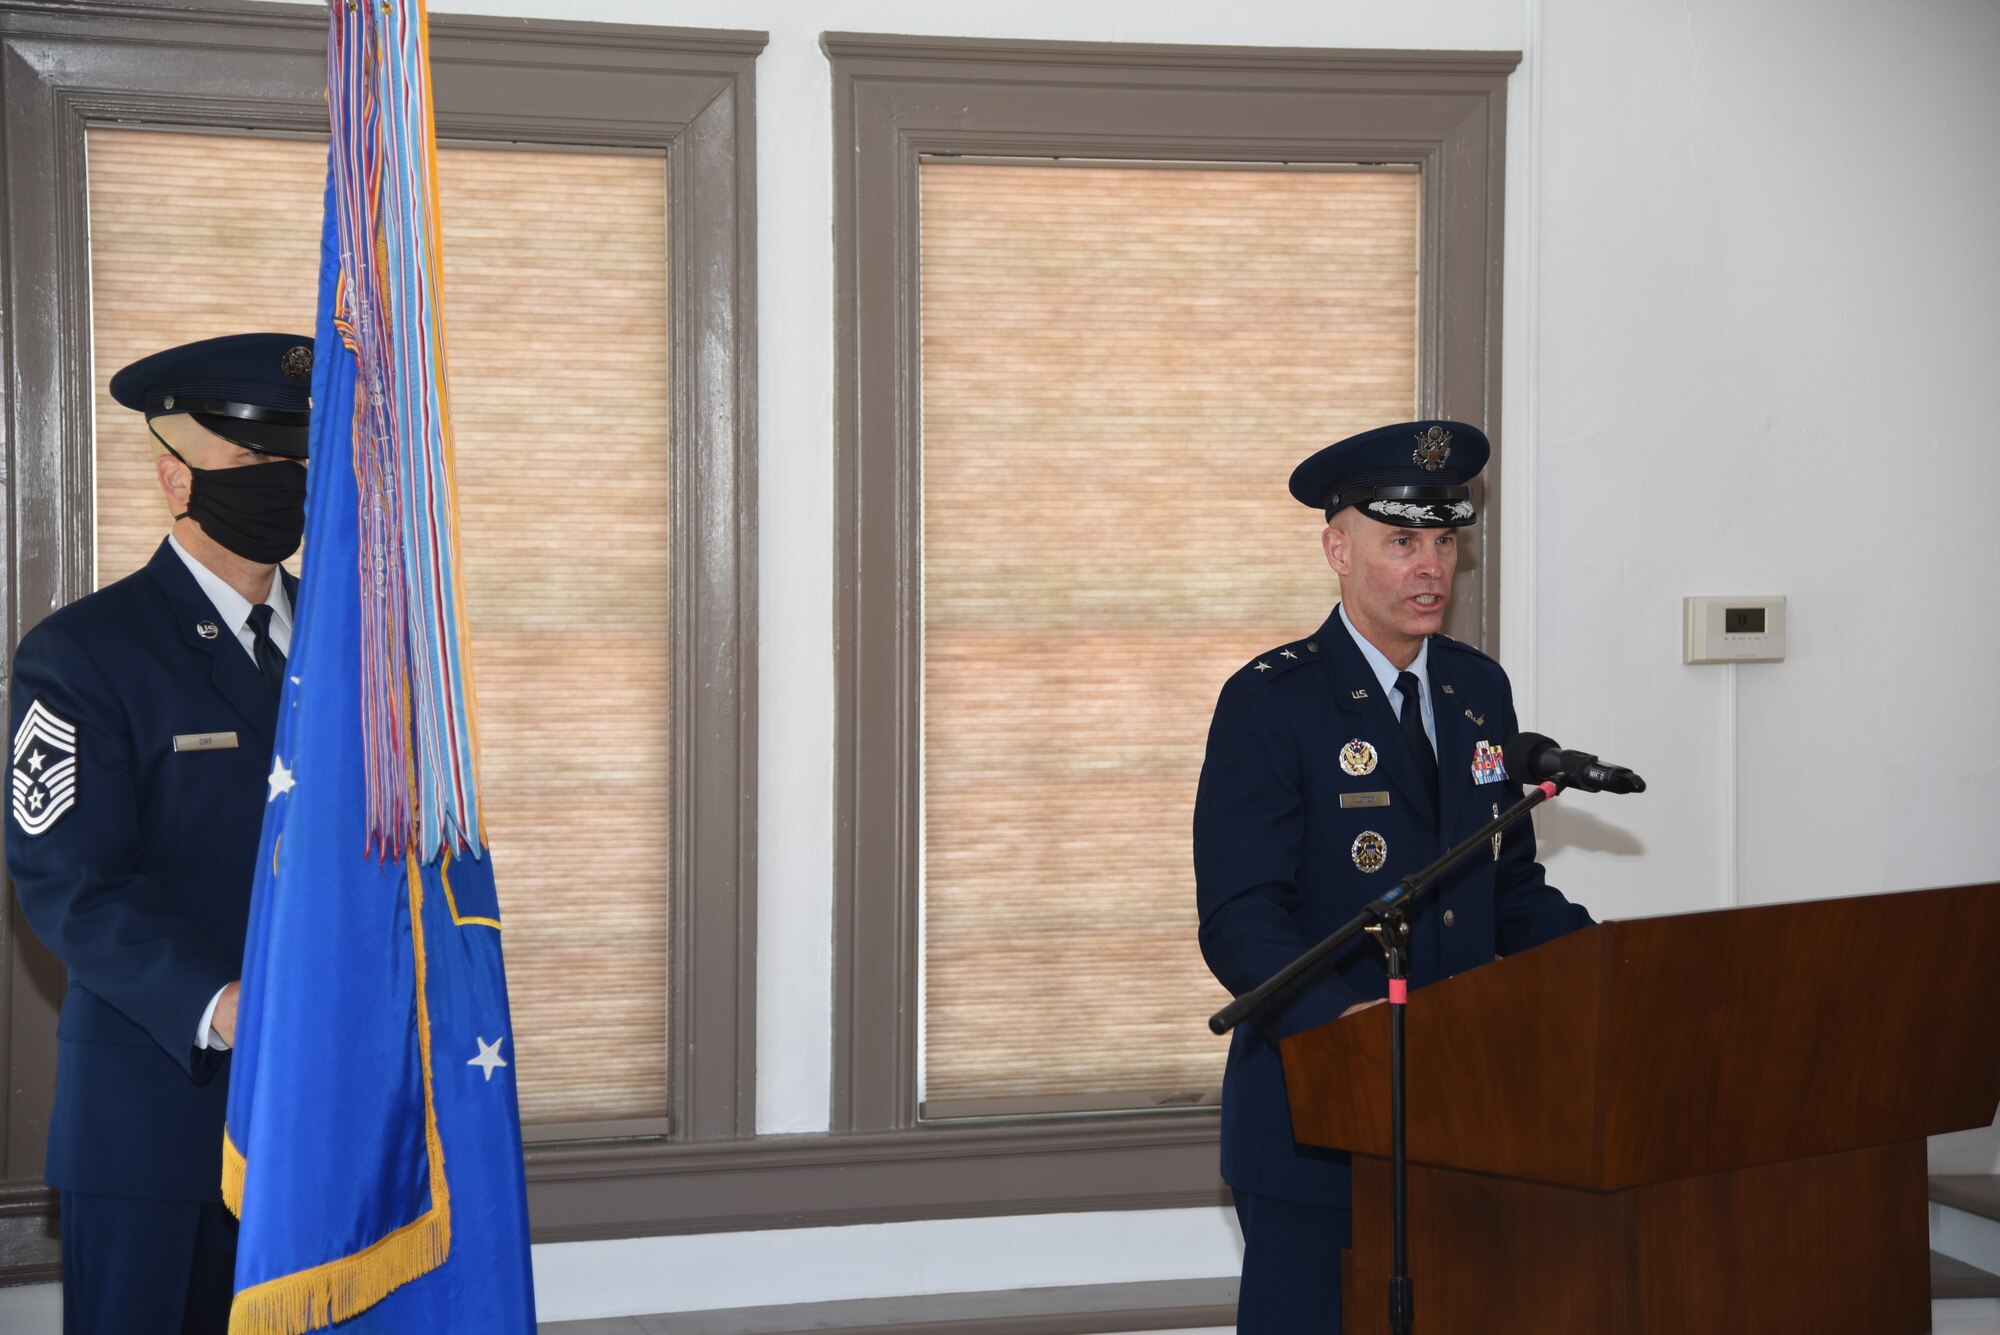 Maj. Gen. Michael Lutton gives remarks during the 20th Air Force change of command ceremony, 8 July, 2020, F. E. Warren Air Force Base, Wyo. During the ceremony, Maj. Gen. Michael J. Lutton took command of 20th Air Force from Maj. Gen. Ferdinand “Fred” B. Stoss. (U. S. Air Force photo by Glenn S. Robertson)